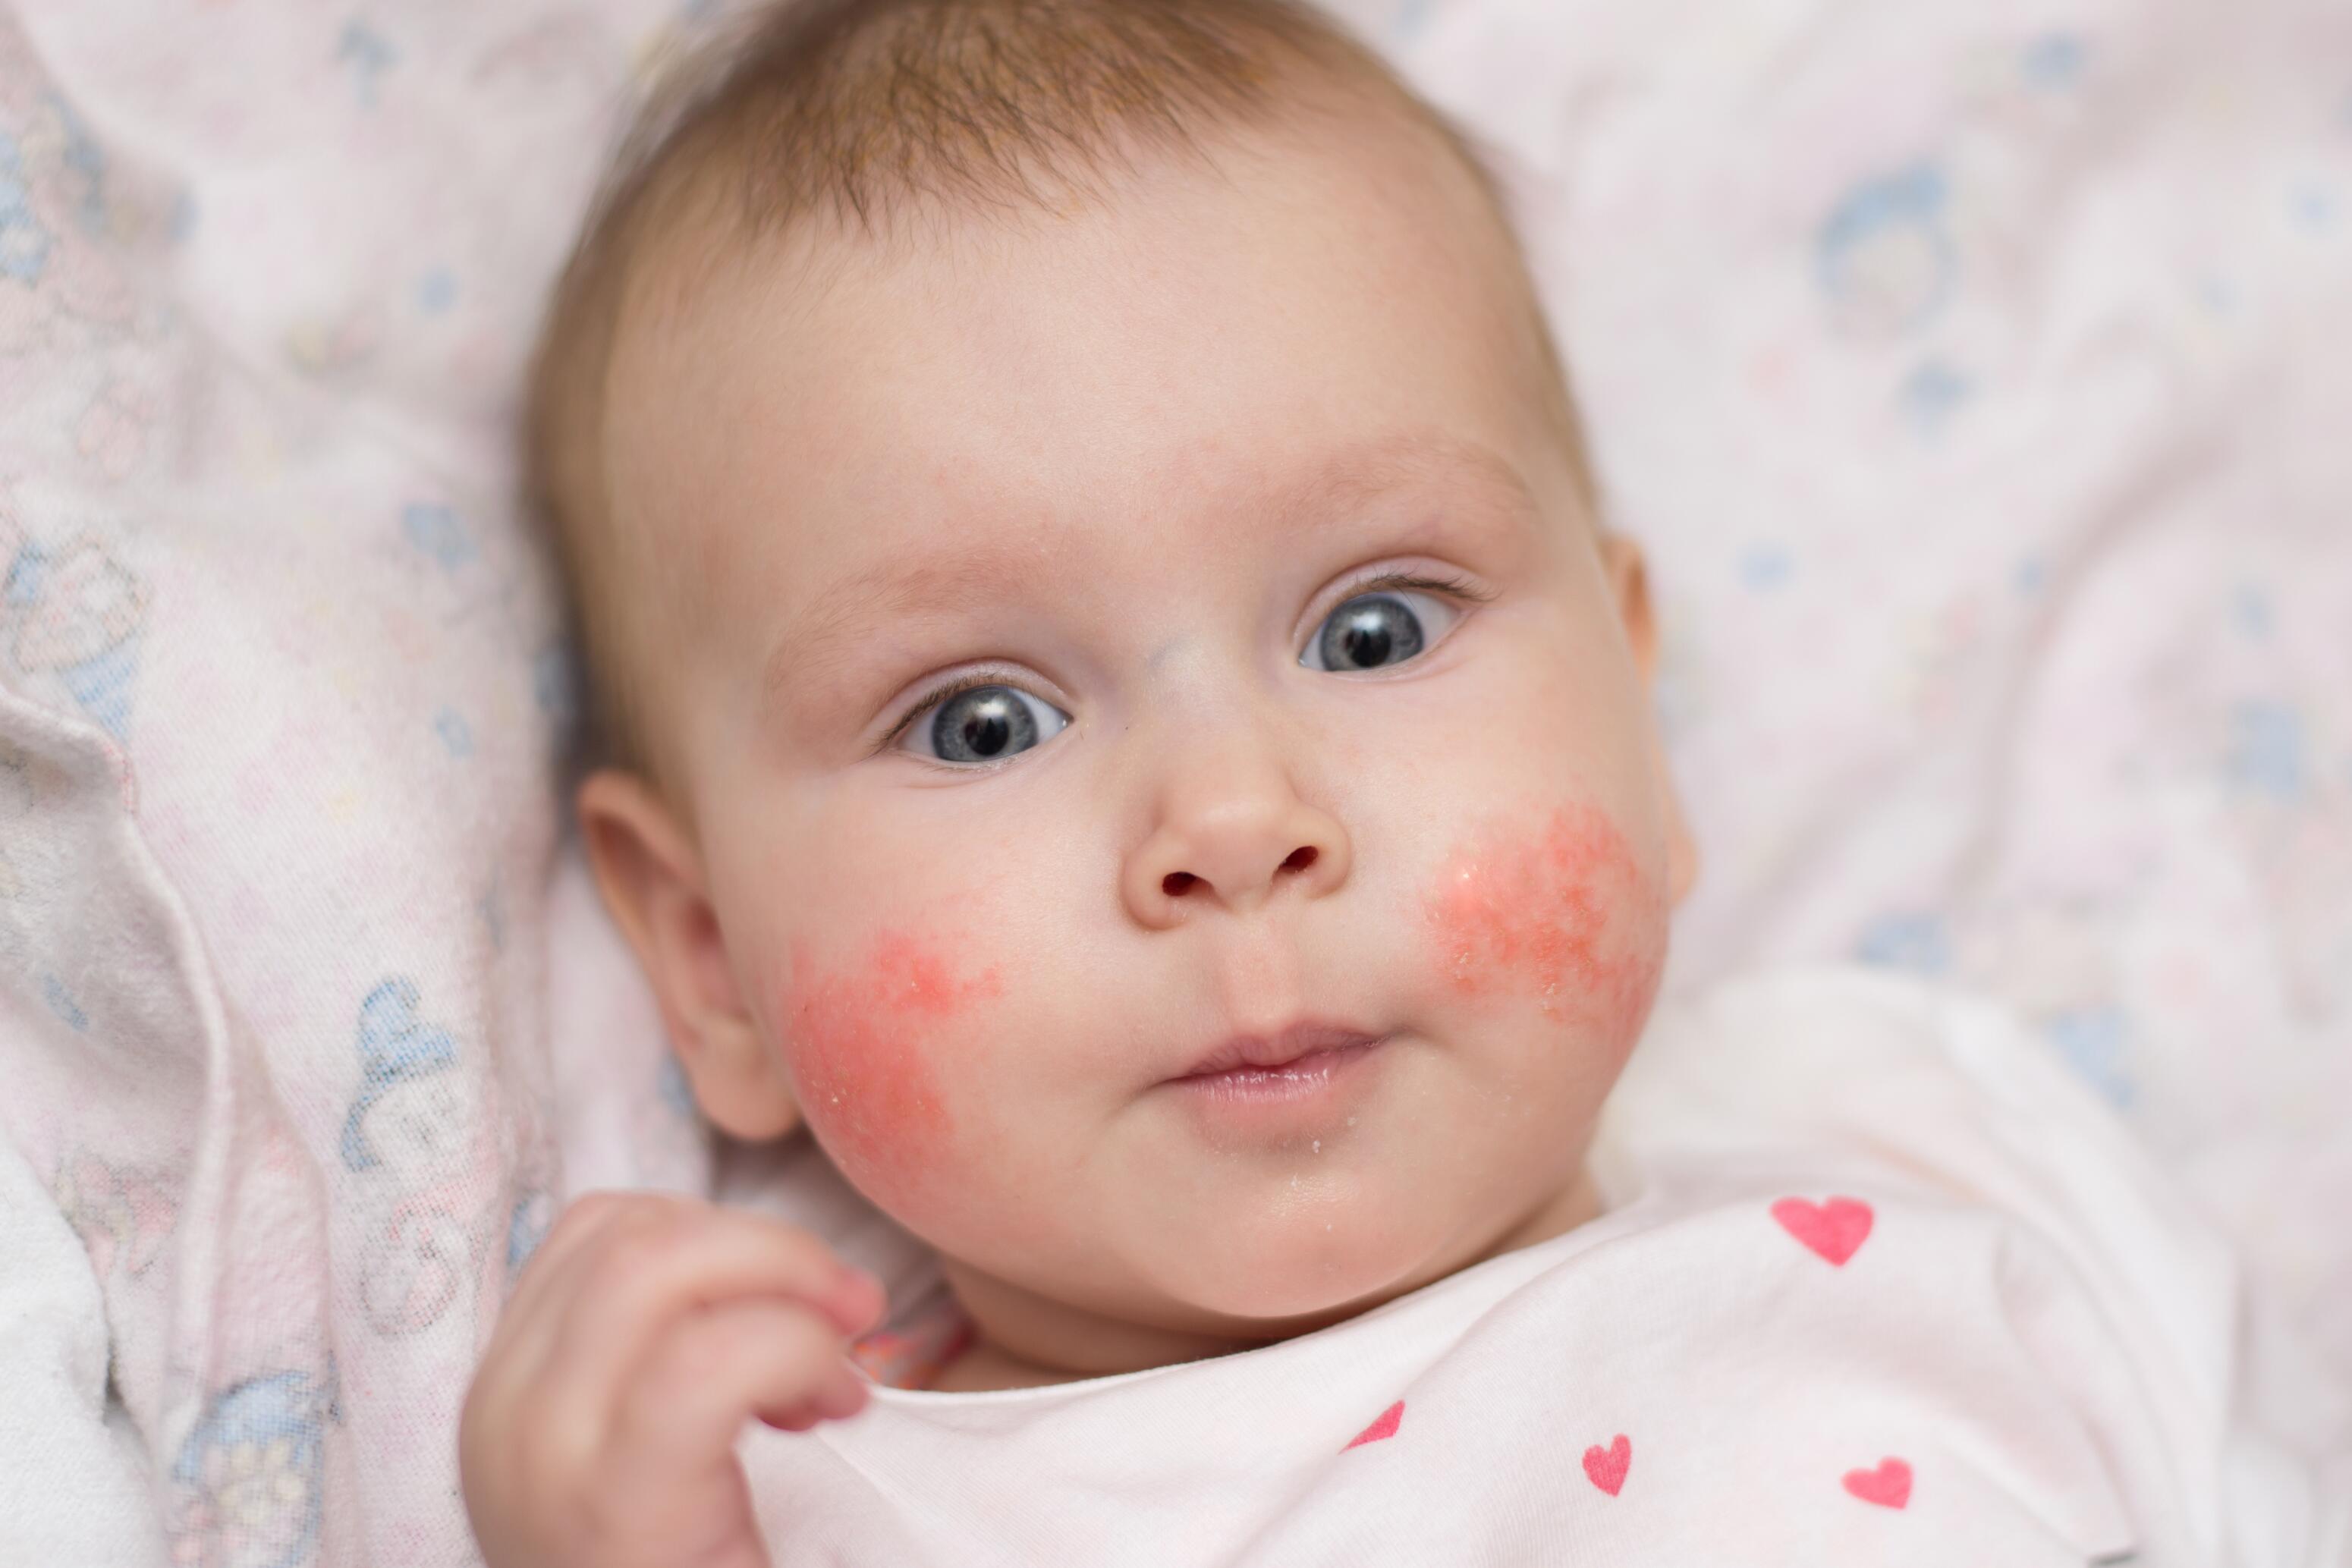 Baby with atopic eczema on the cheeks